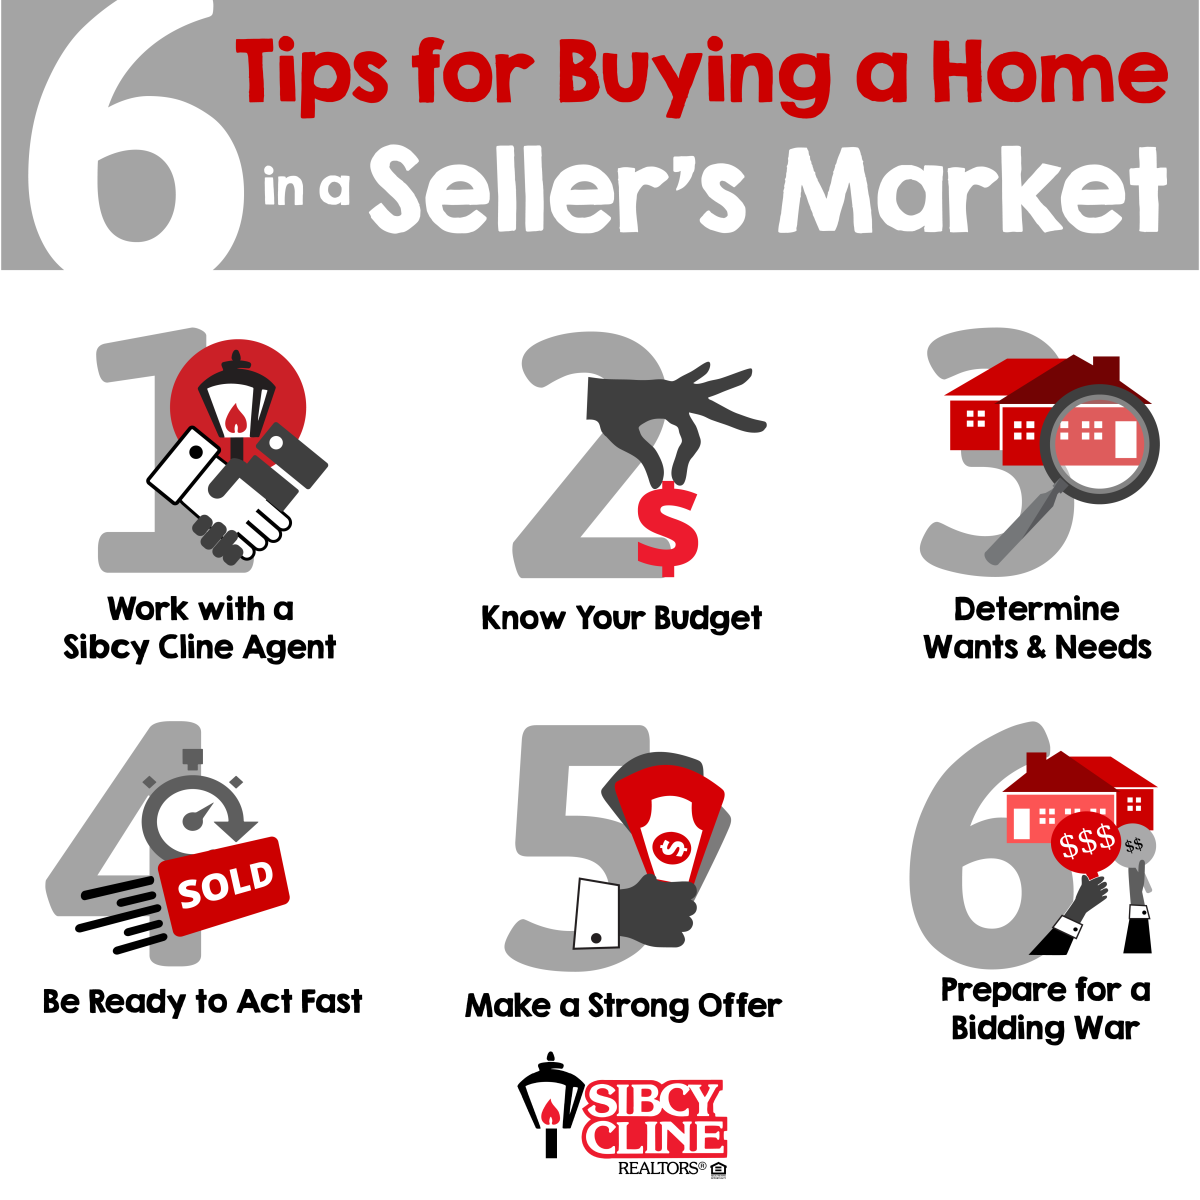 Tips for Buying a Home in a Seller’s Market | Sibcy Cline Blog